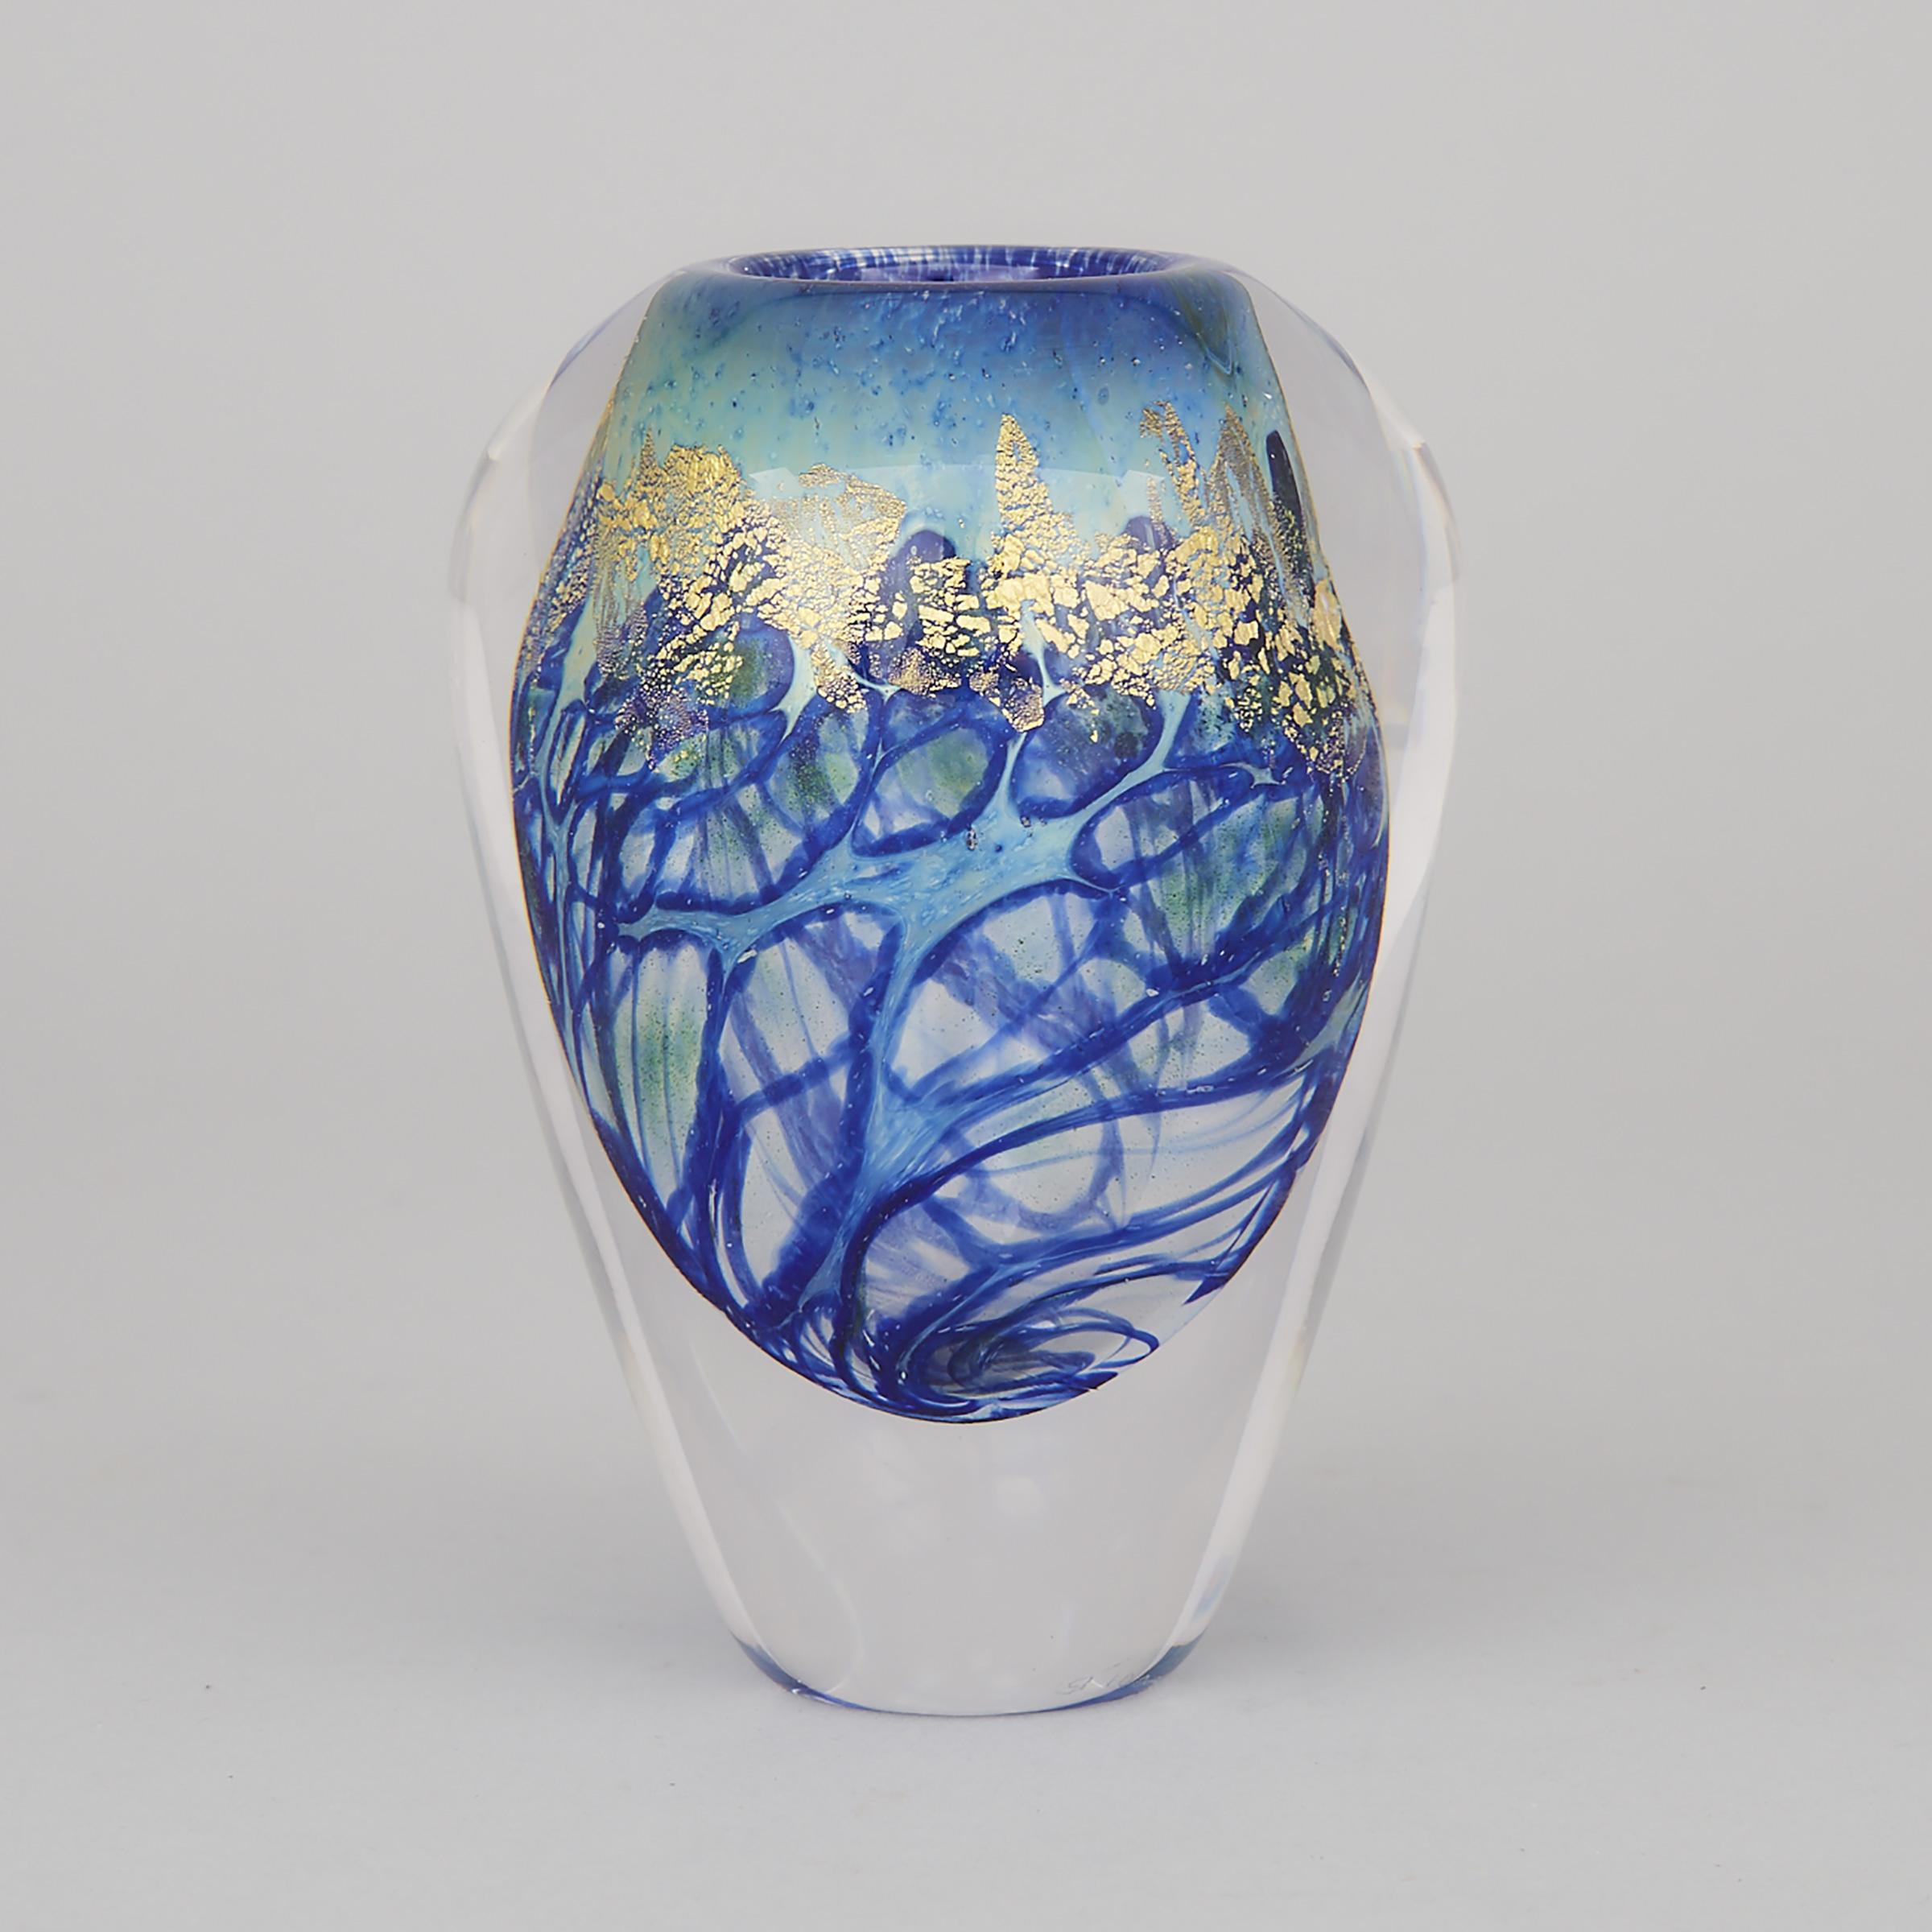 Toan Klein (American/Canadian, b.1949), Internally Decorated Glass Vase, 1996